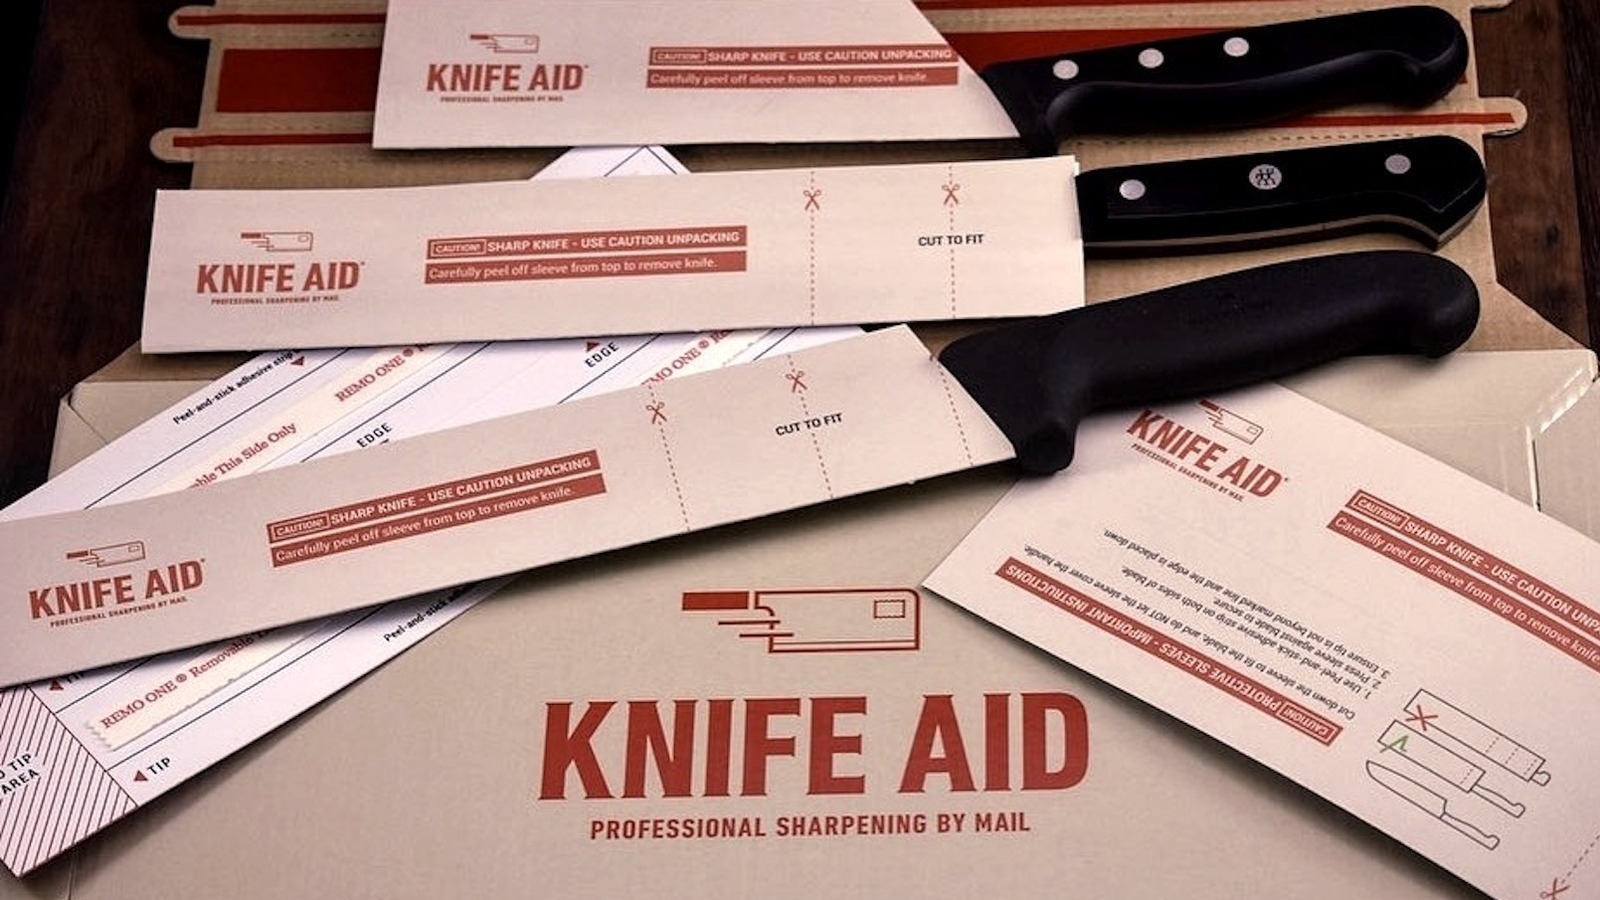 https://www.foodrepublic.com/img/gallery/knife-aid-heres-what-happened-after-shark-tank/l-intro-1689358432.jpg